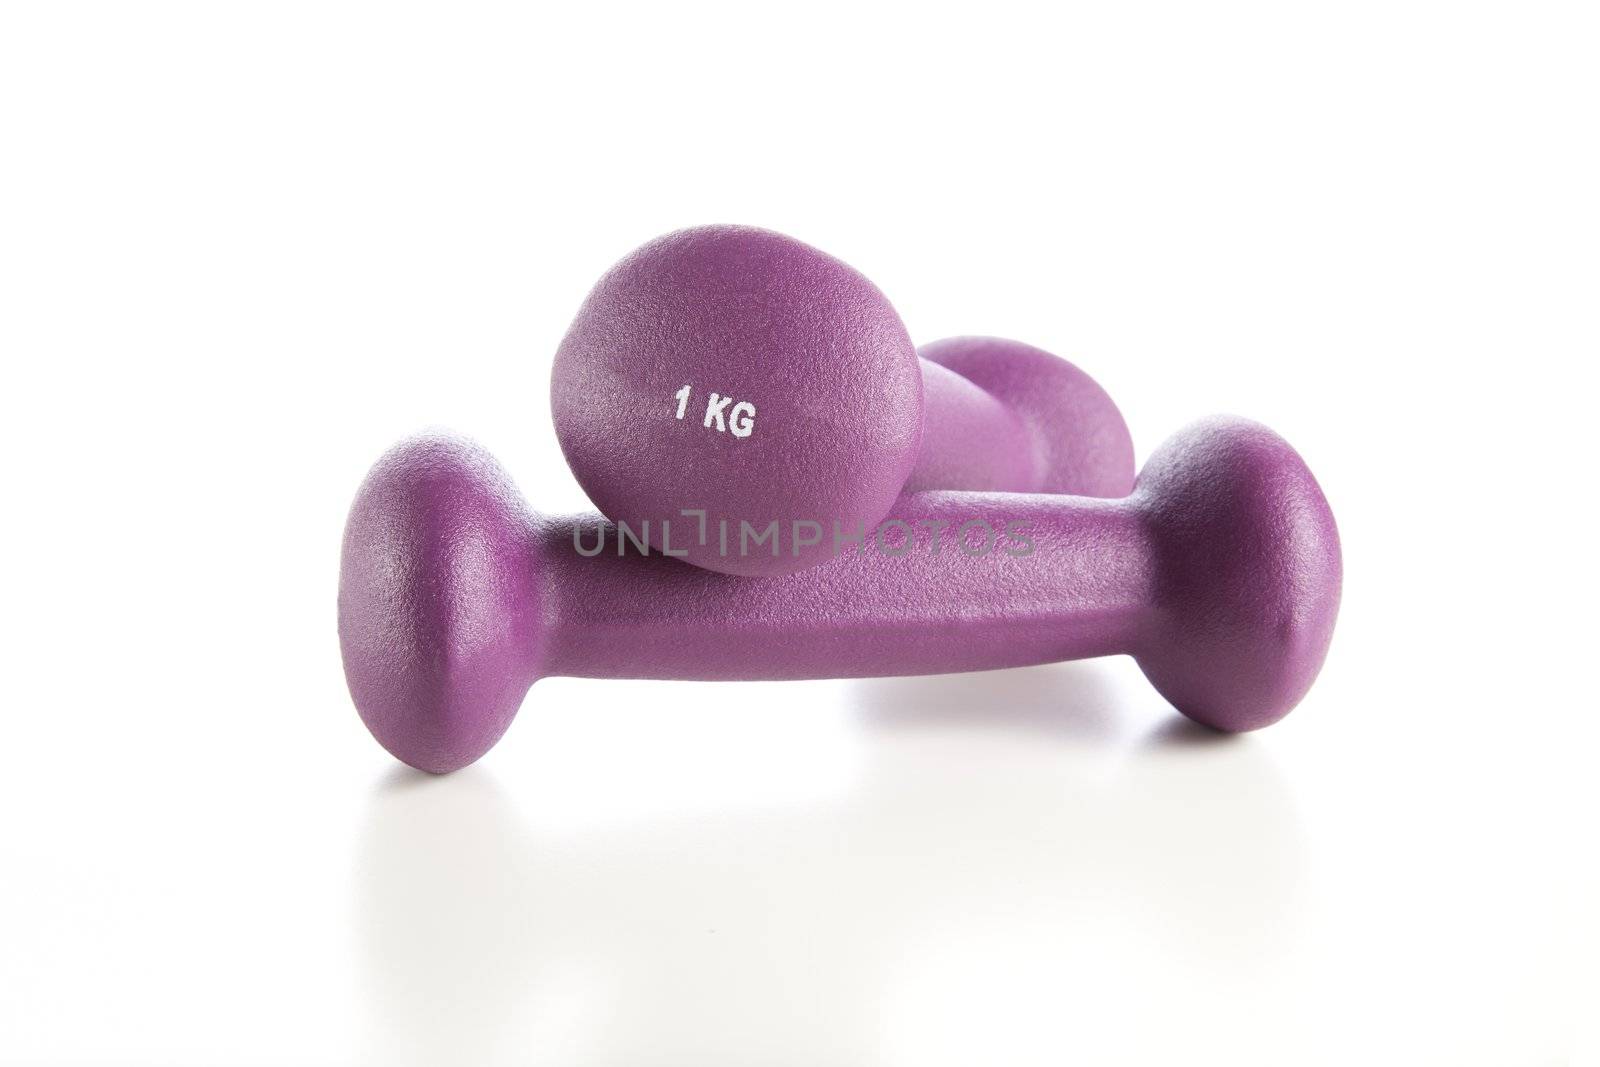 Two dumbbell weights isolated on white with reflections in table.